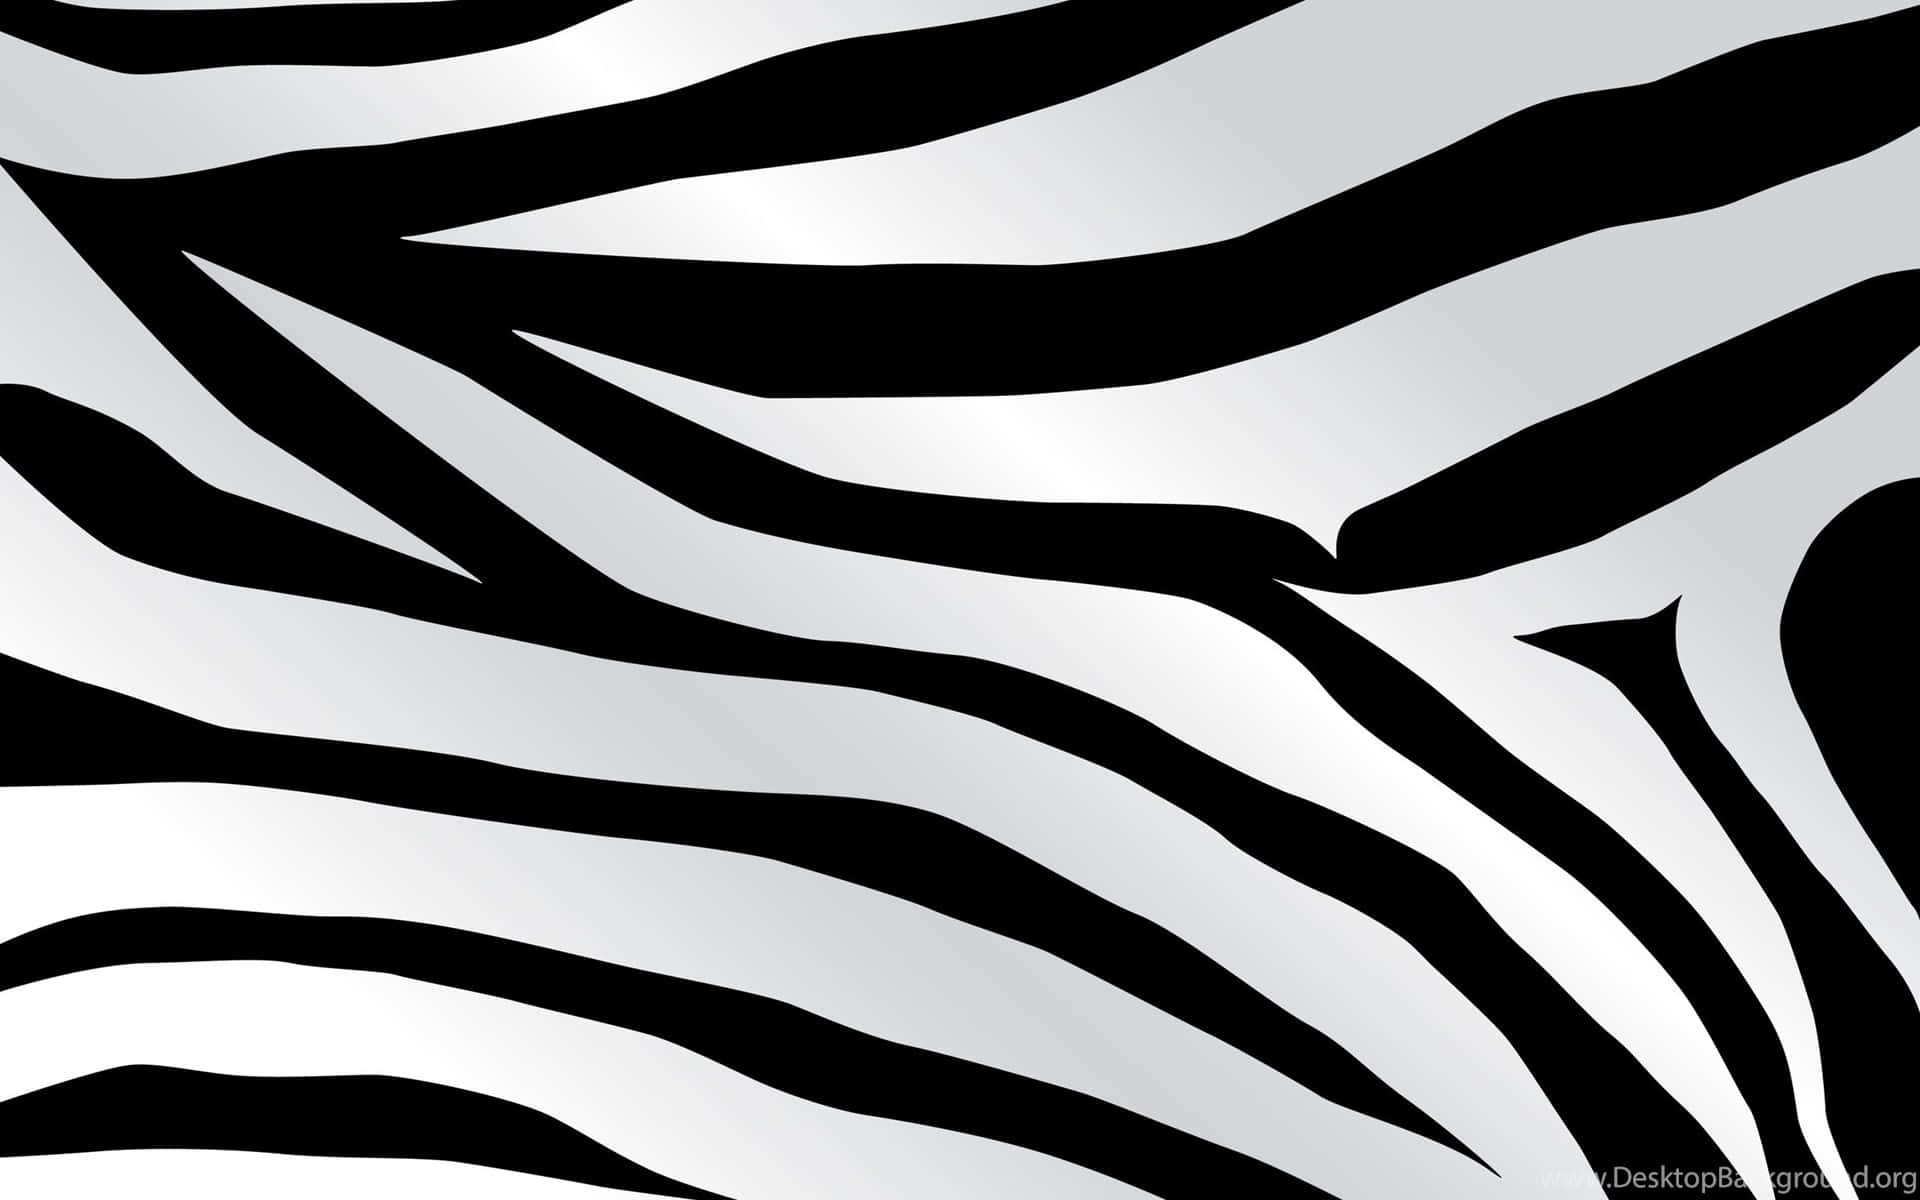 100+] Black And White Striped Background s 